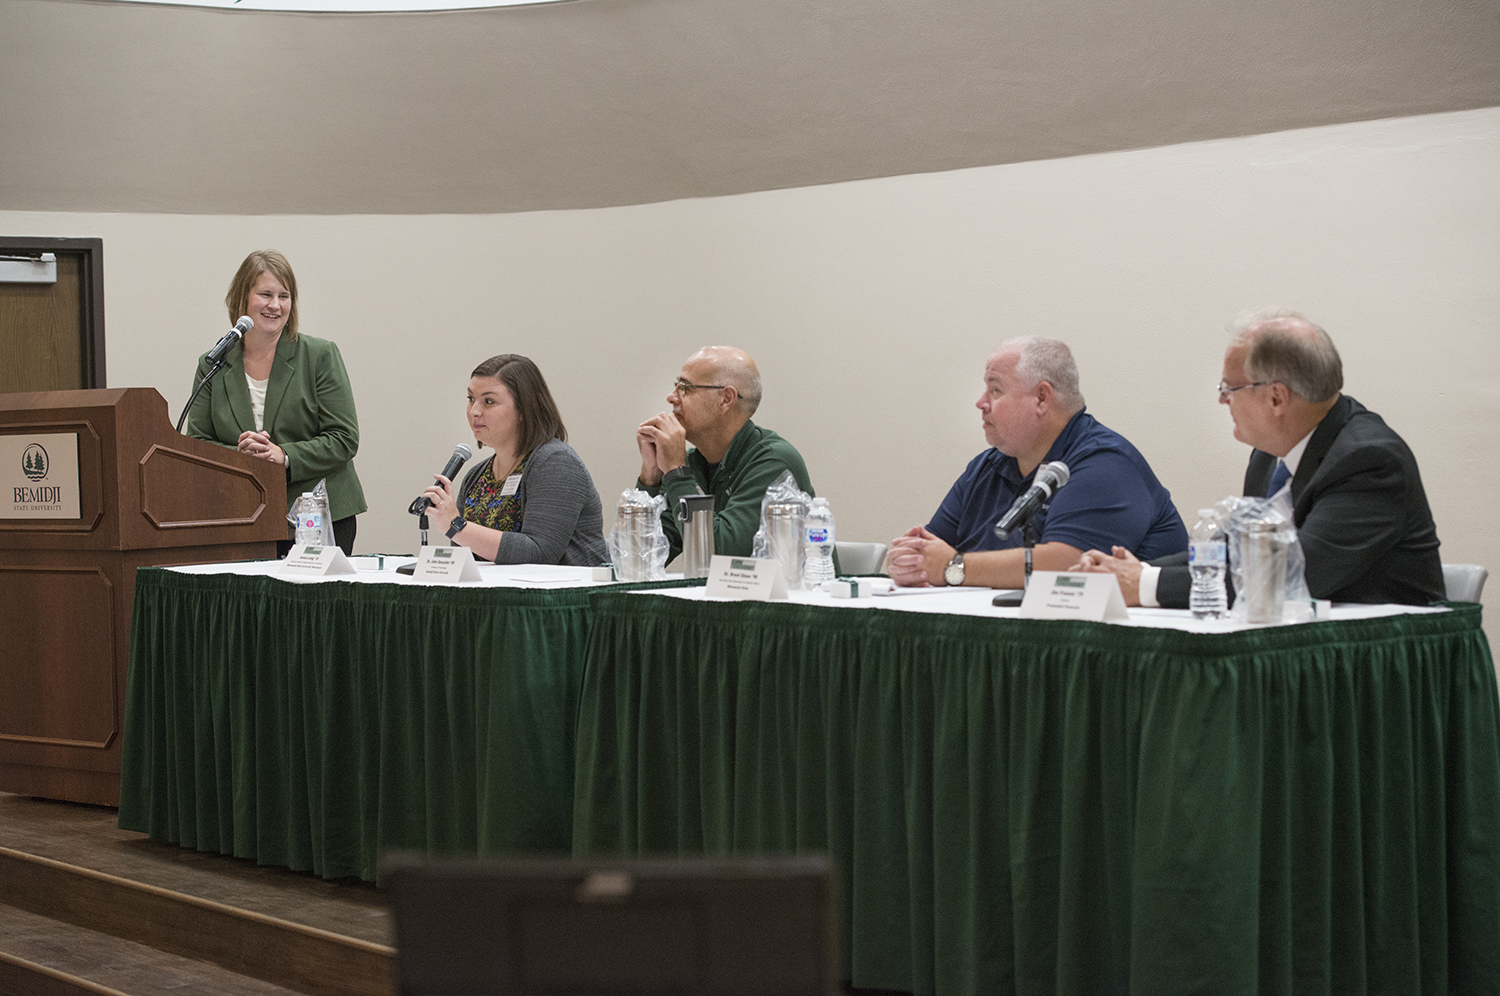 Alumni Leaders in the Classroom, one of the signature events at Bemidji State University’s Homecoming weekend, brought more than 20 BSU alumni back into the classroom at their alma mater for panel discussions.